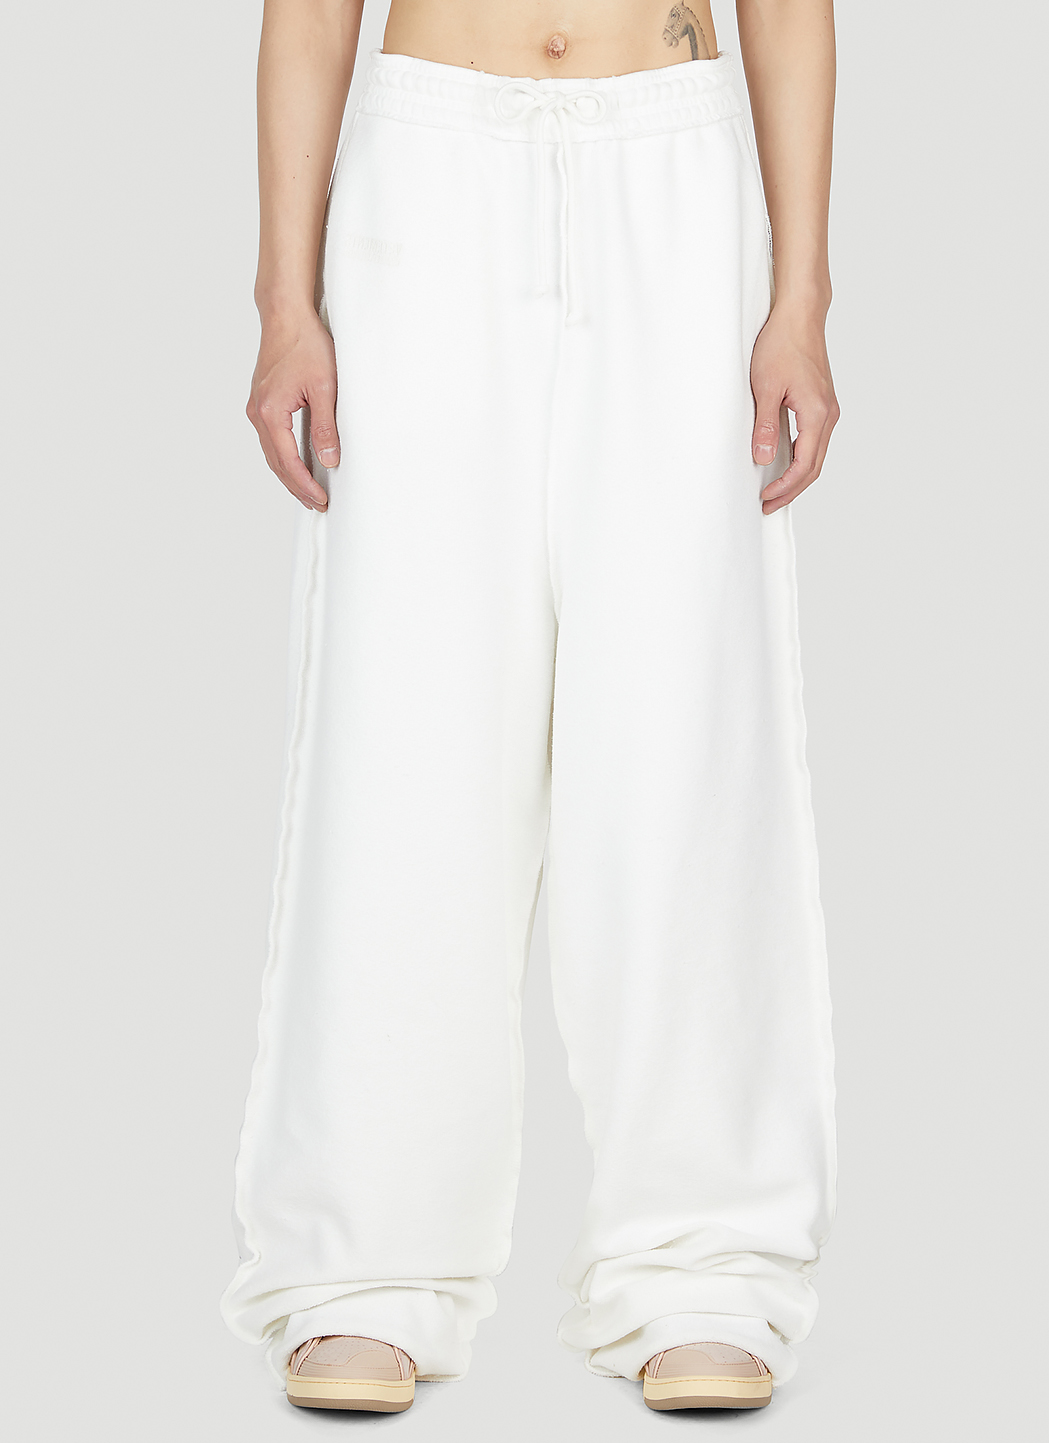 Inside Out Track Pants